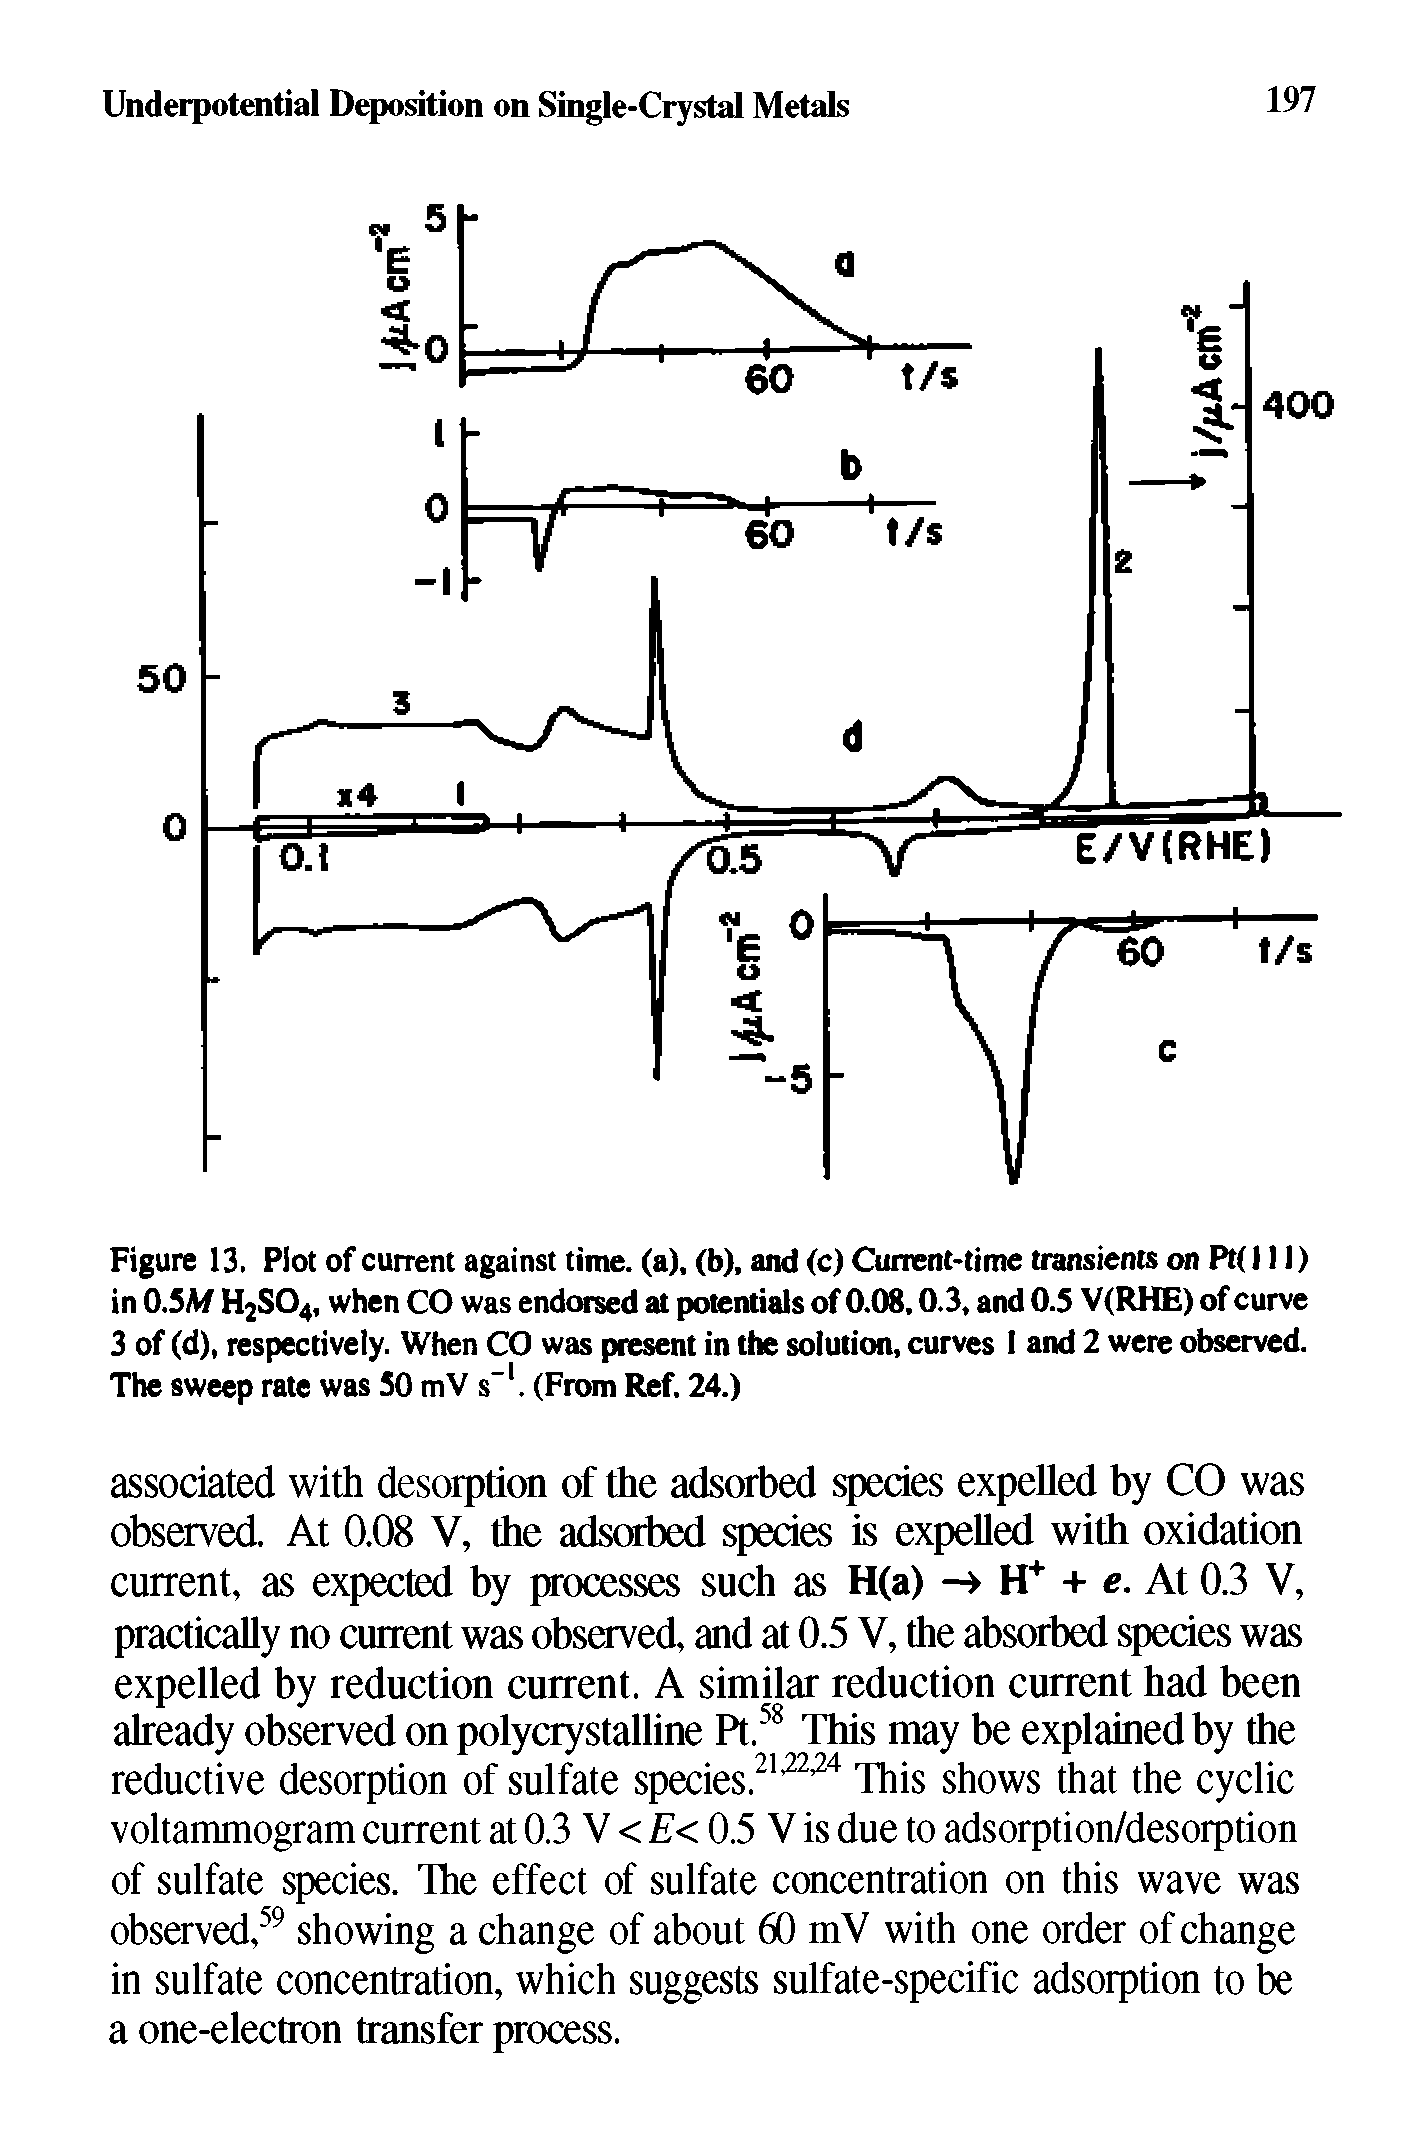 Figure 13. Plot of current against time, (a), (b), and (c) Current-time transients on Pt(l 11) in 0.5M H2SO4, when CO was endorsed at potentials of 0.08.0.3, and 0.5 V(RHE) of curve 3 of (d), respectively. When CO was ptesent in the solution, curves I and 2 were observed. The sweep rate was 50 mV s". (From Ref. 24.)...